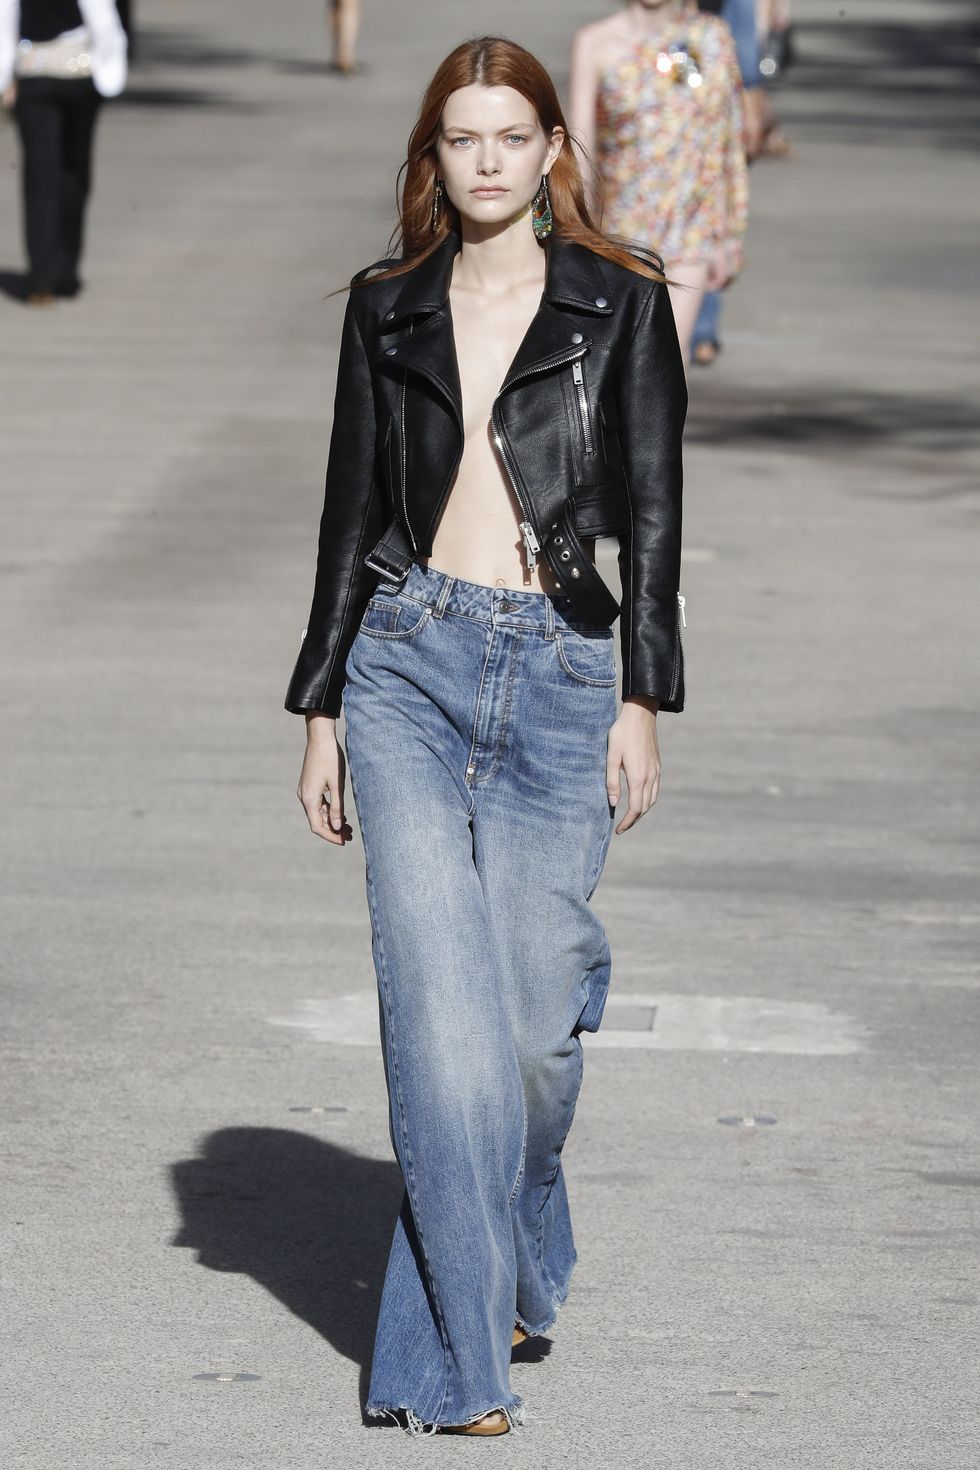 Bell Bottoms Are A NYFW Spring/Summer 2023 Trend To Take Note Of